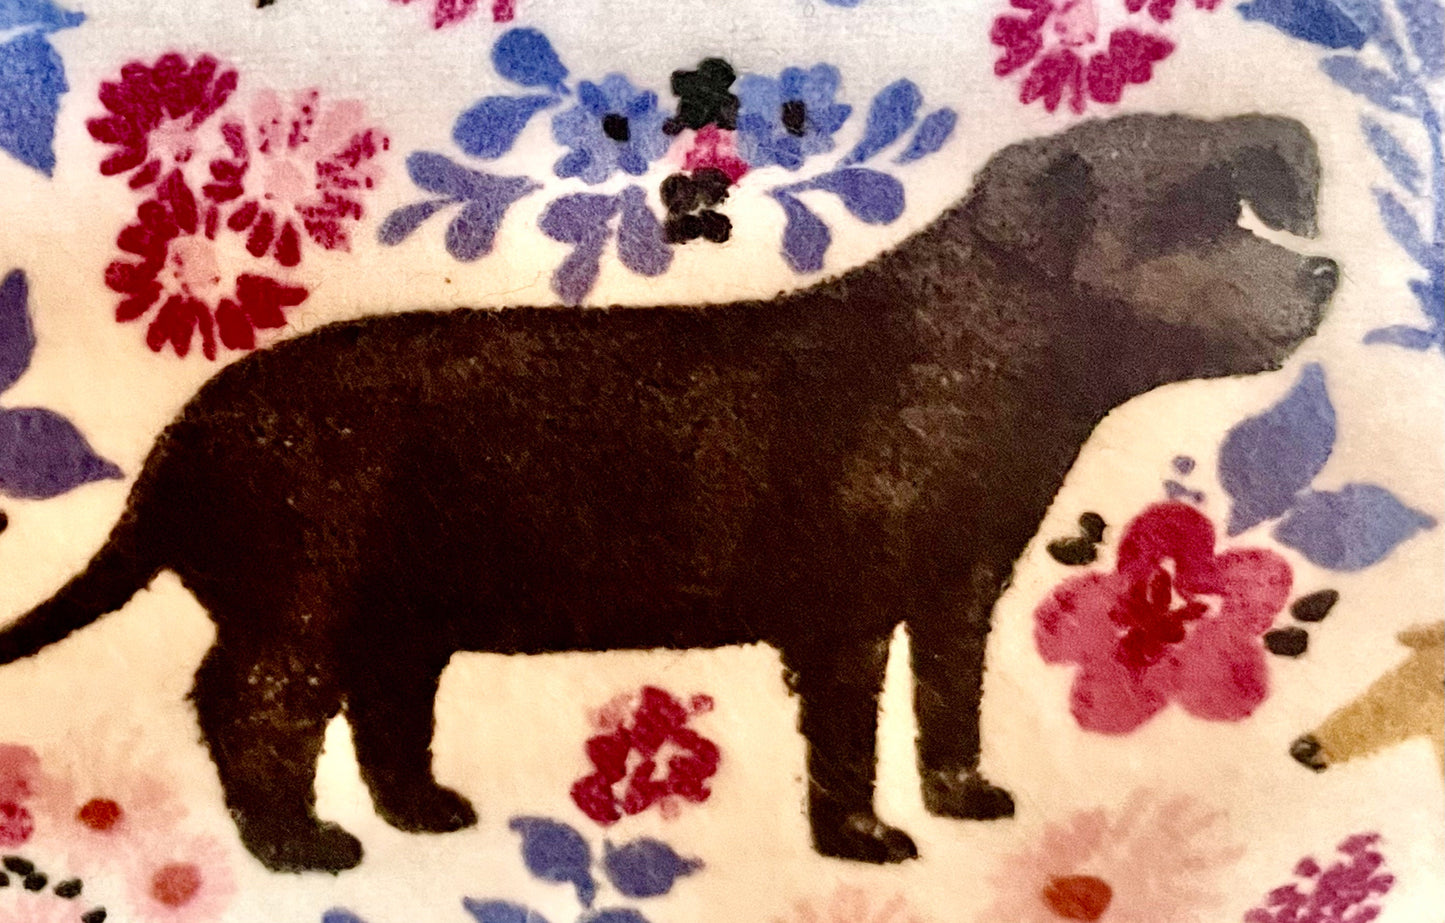 Every favorite dog and beautiful flowers dog lover dream blanket!